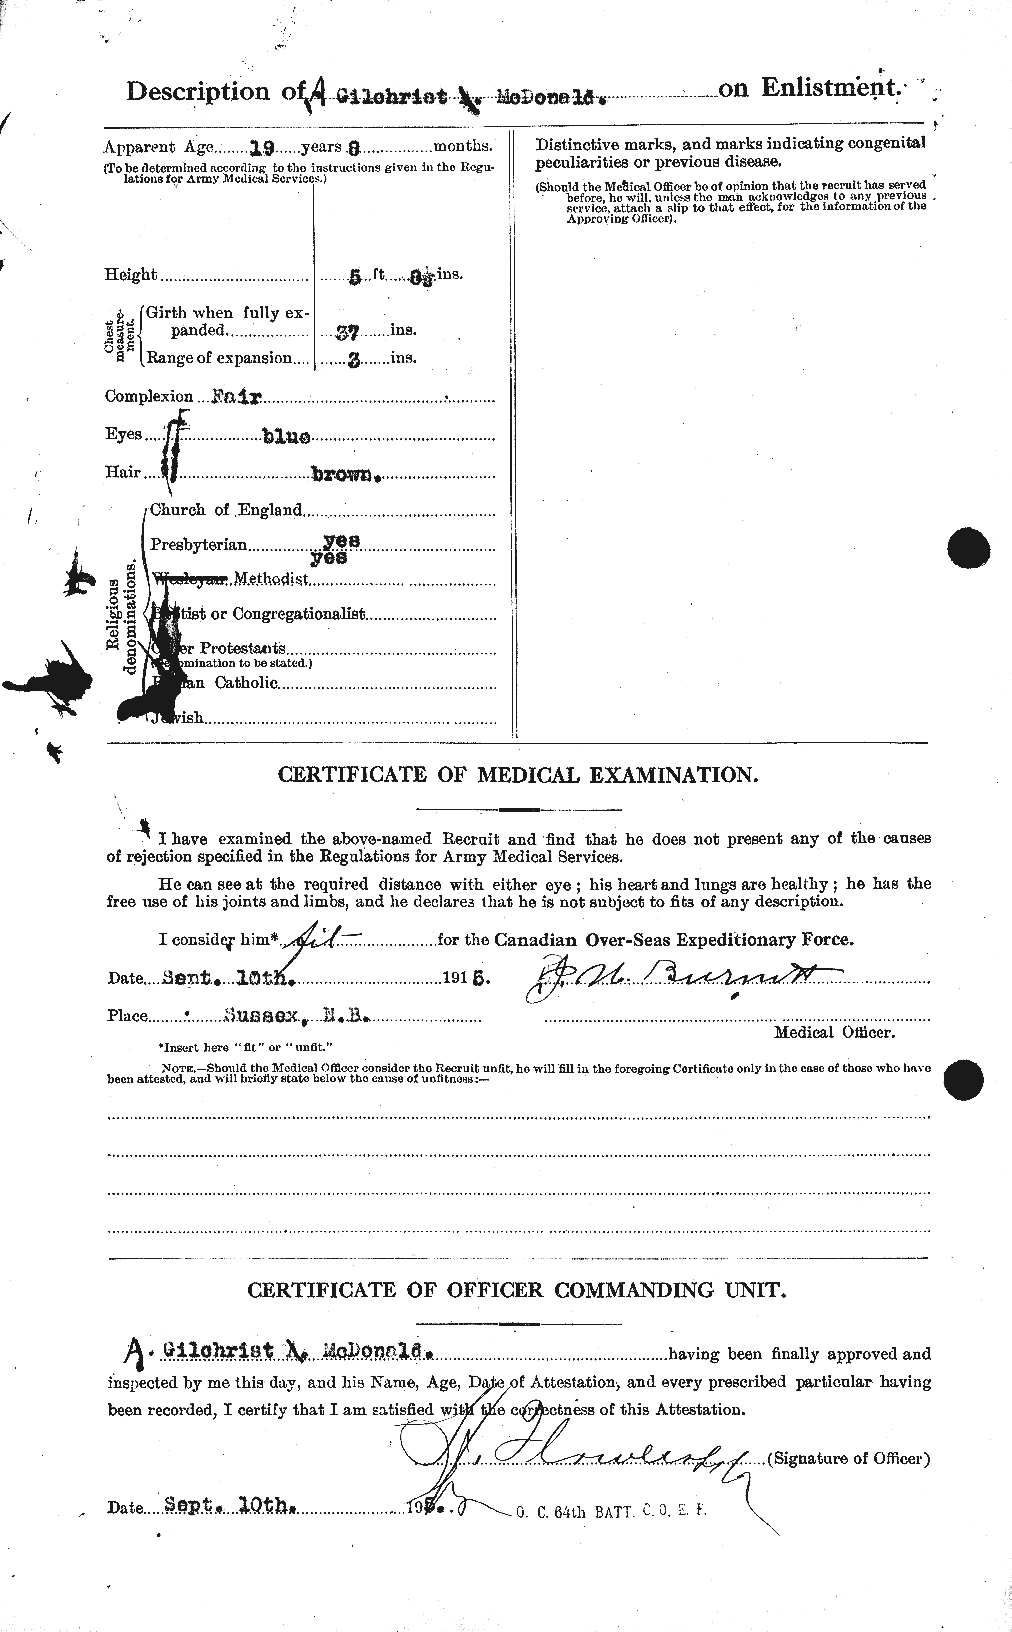 Personnel Records of the First World War - CEF 519263b